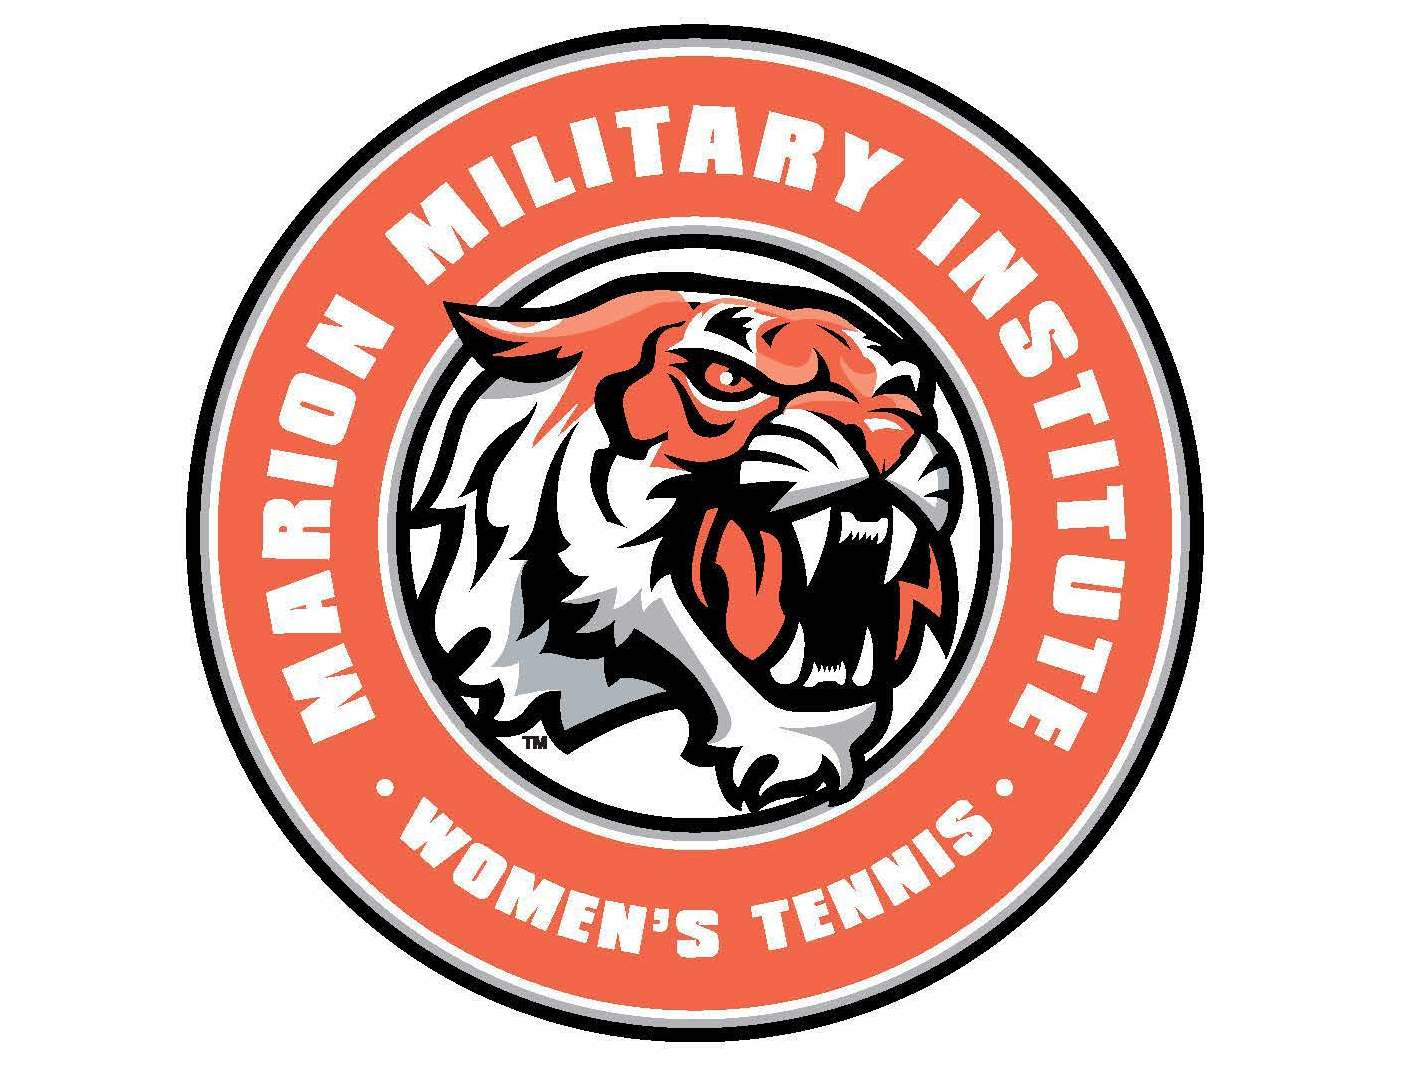 Singles Wins by Azzaro and Lewis Help Lady Tigers Defeat MUW Owls